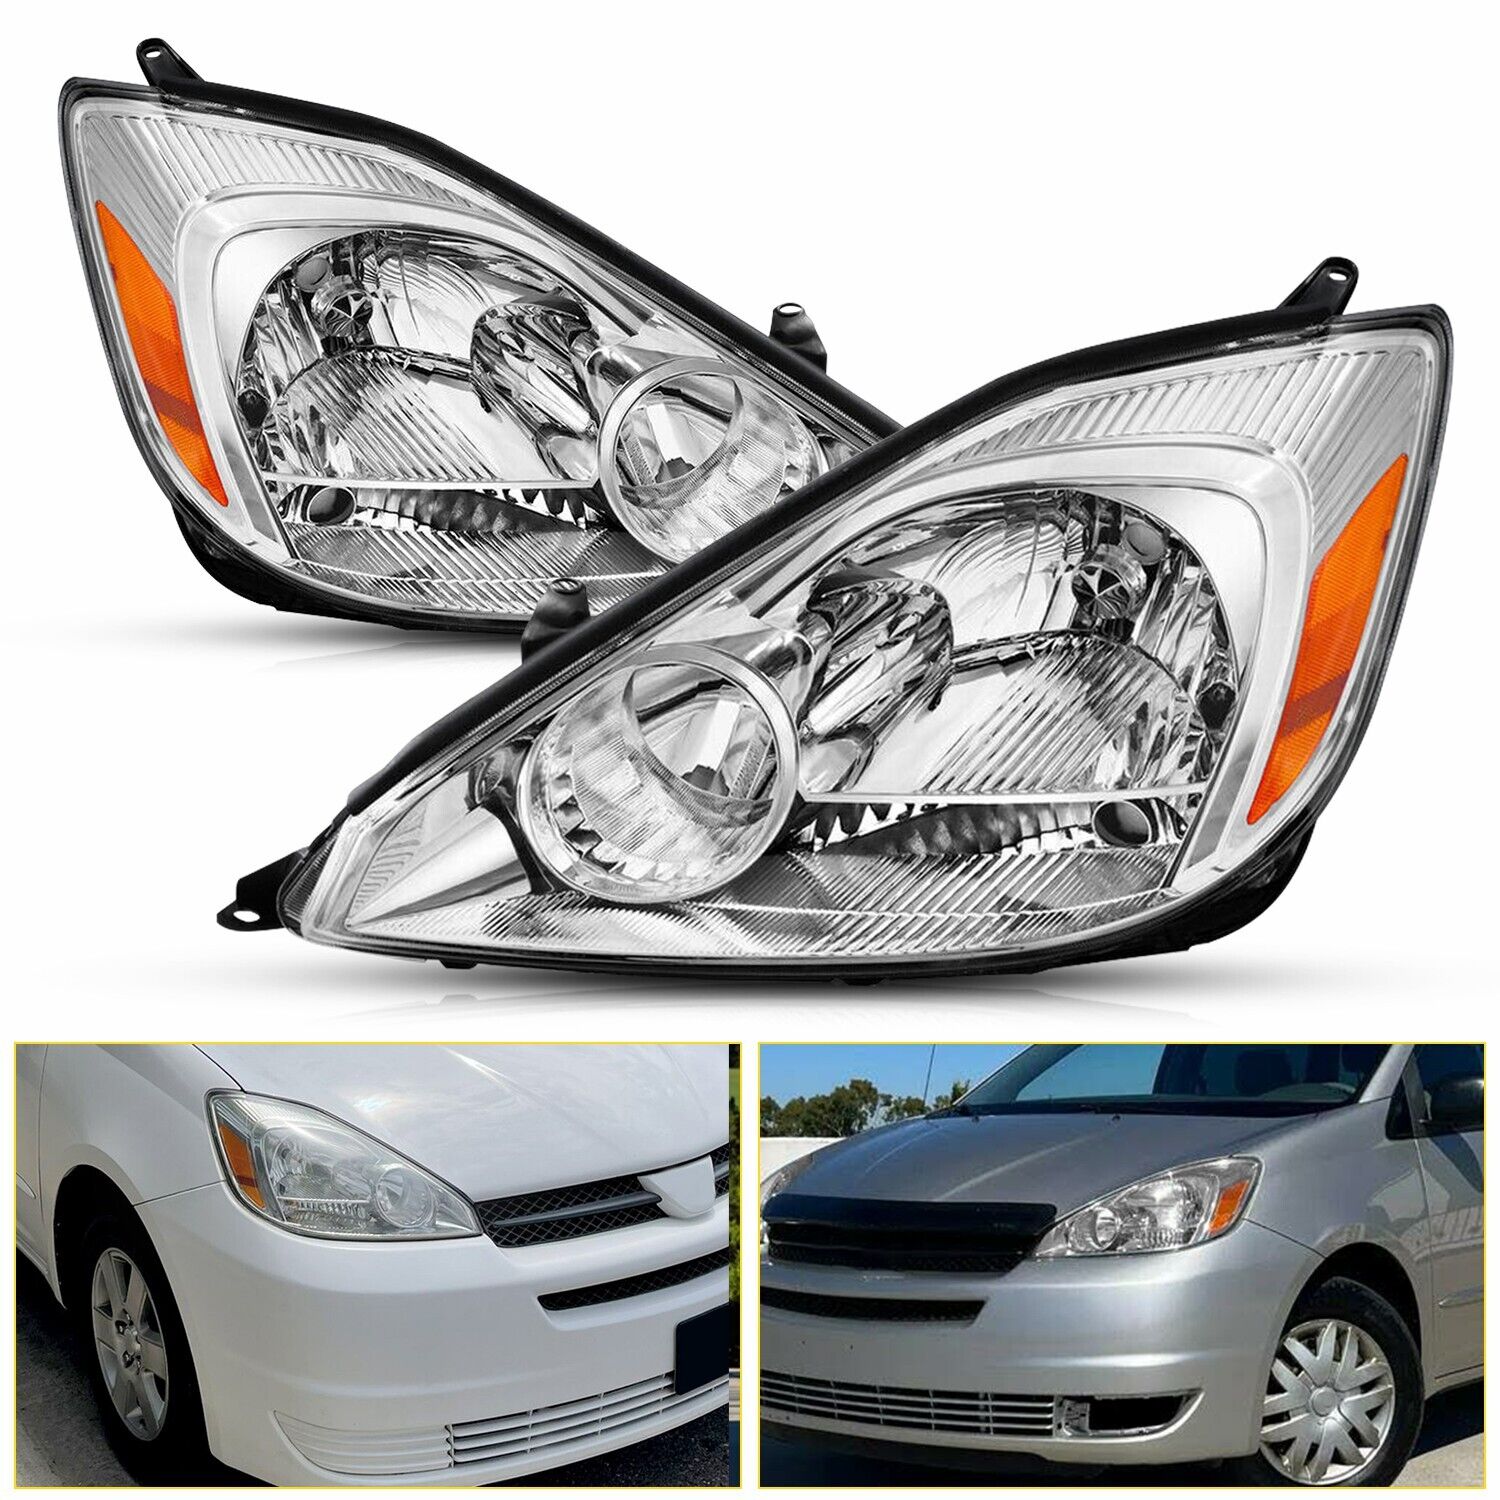 For 2004 2005 Toyota Sienna Headlights Assemblies Chrome Left & Right Side